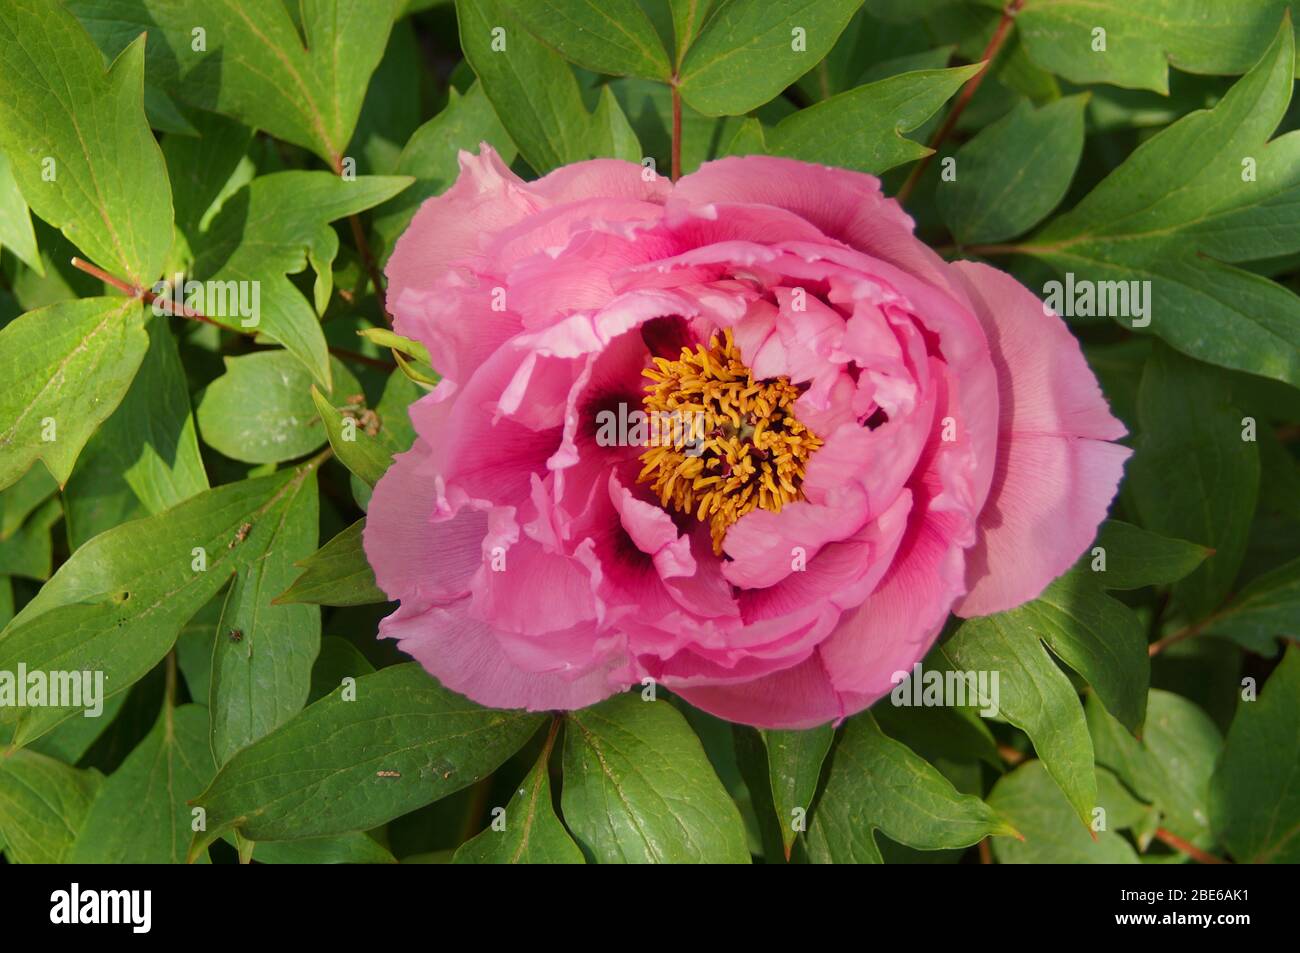 Close up of a tree peony flower 'Paeonia' with a leafy background in a flower bed Stock Photo